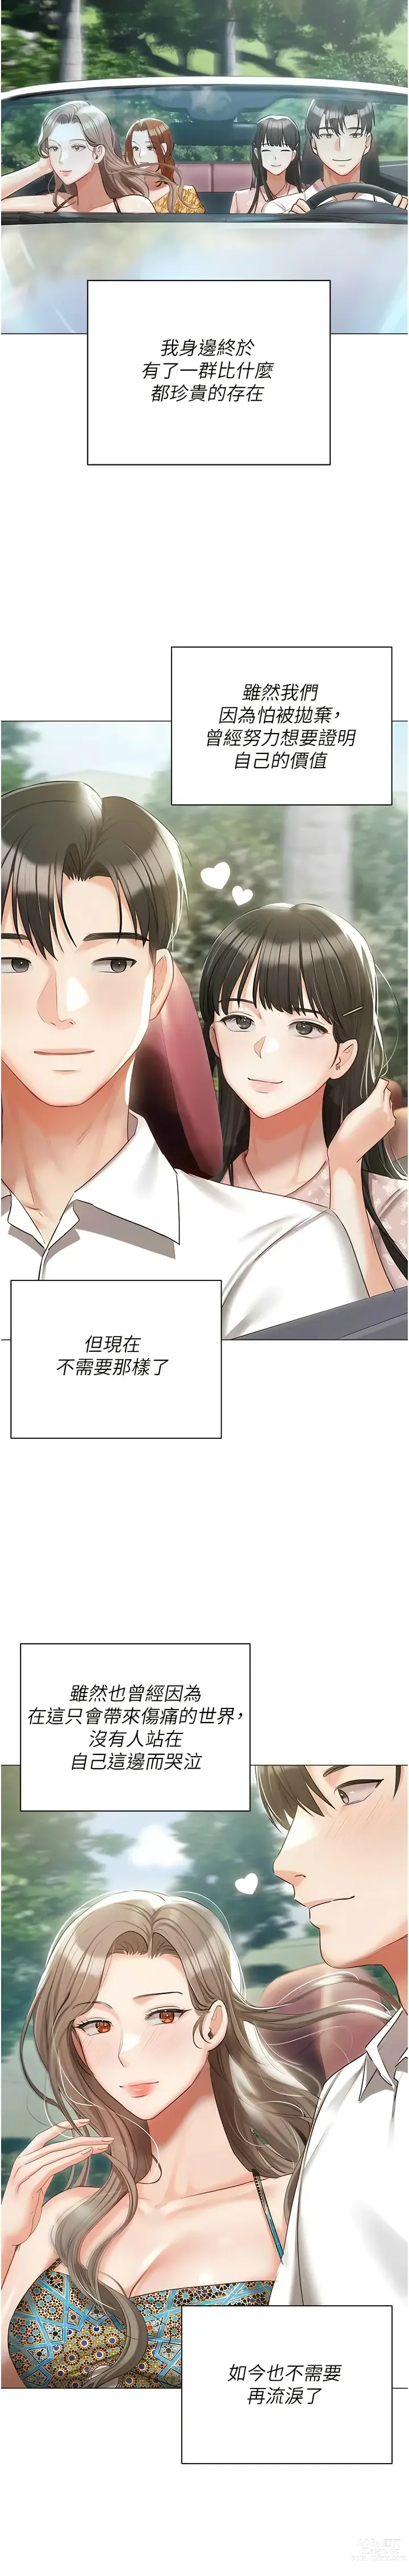 Page 1983 of manga 私宅女主人／Hyeonjung’s Residence